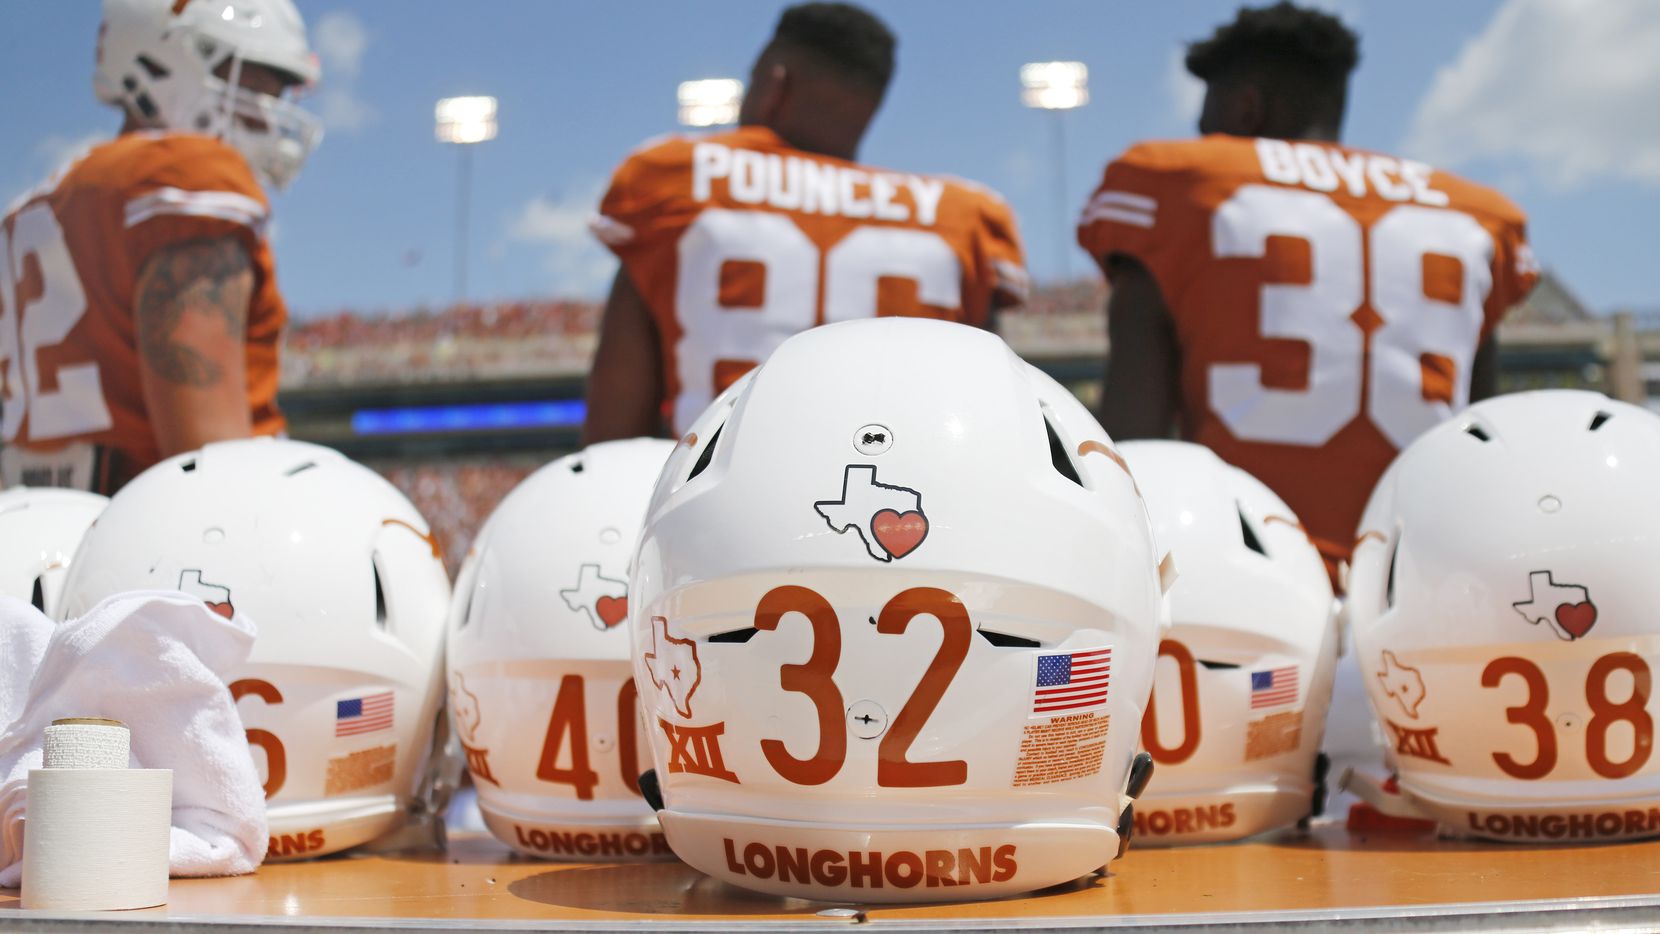 Every Texas Longhorns helmet sports a special decal showing support for the Houston area...